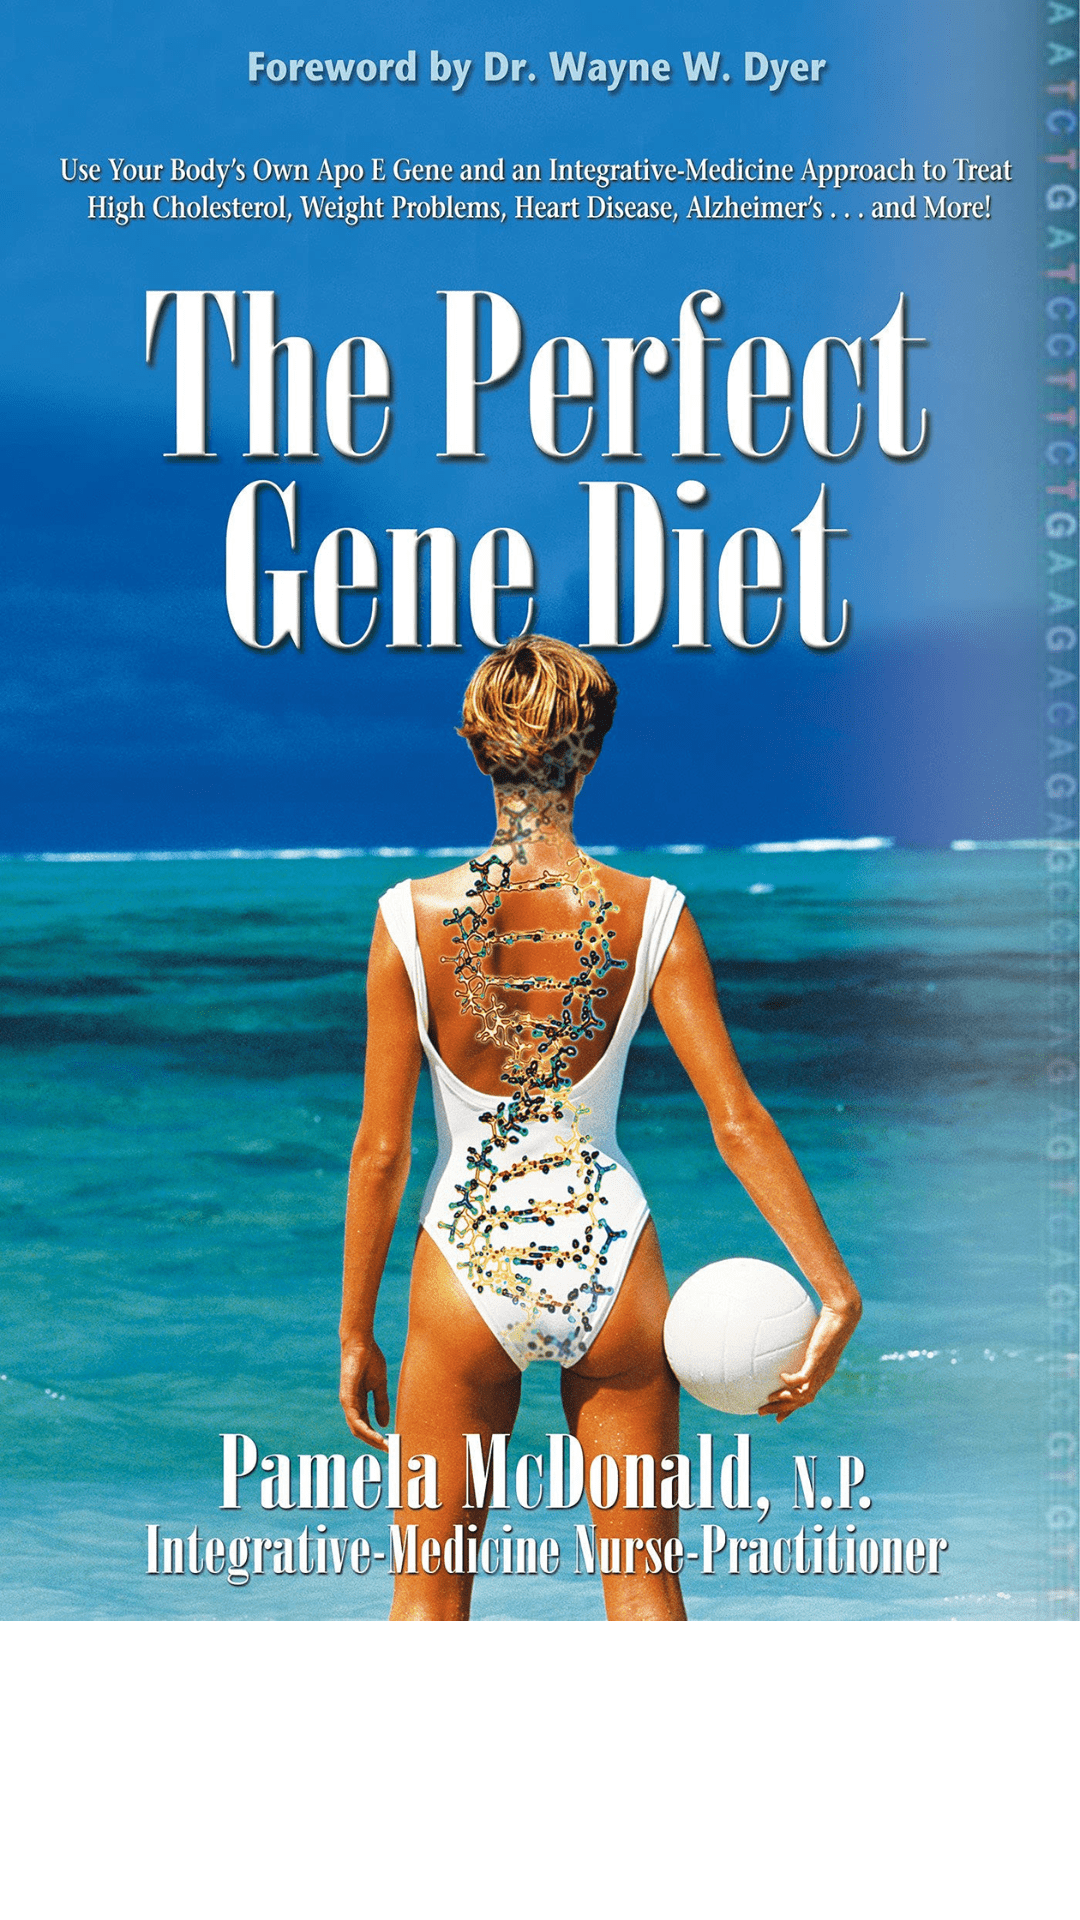 The Perfect Gene Diet: Use Your Body's Own APO E Gene to Treat High Cholesterol, Weight Problems, Heart Disease, Alzheimer's...and More!